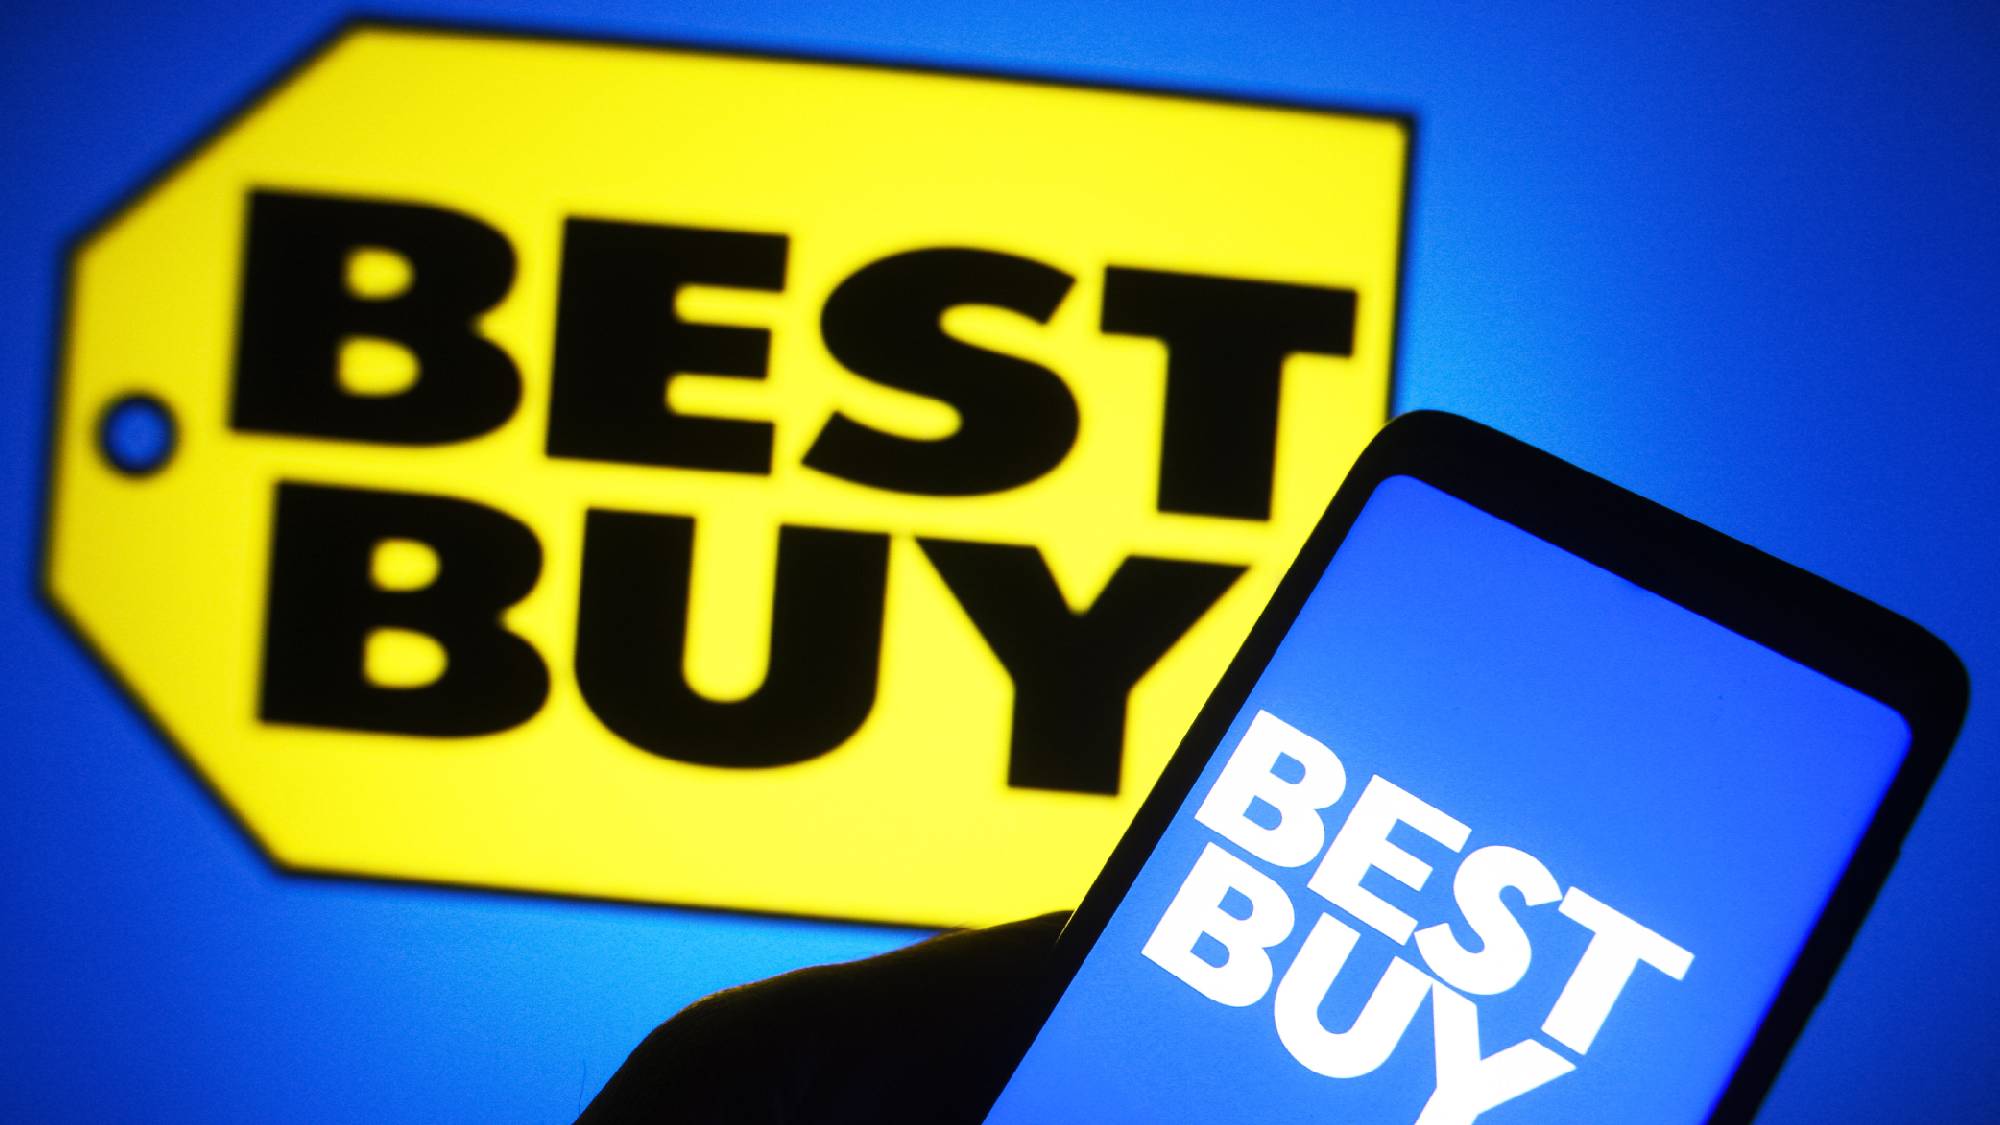 best-buy-logo - Best Buy Corporate News and Information